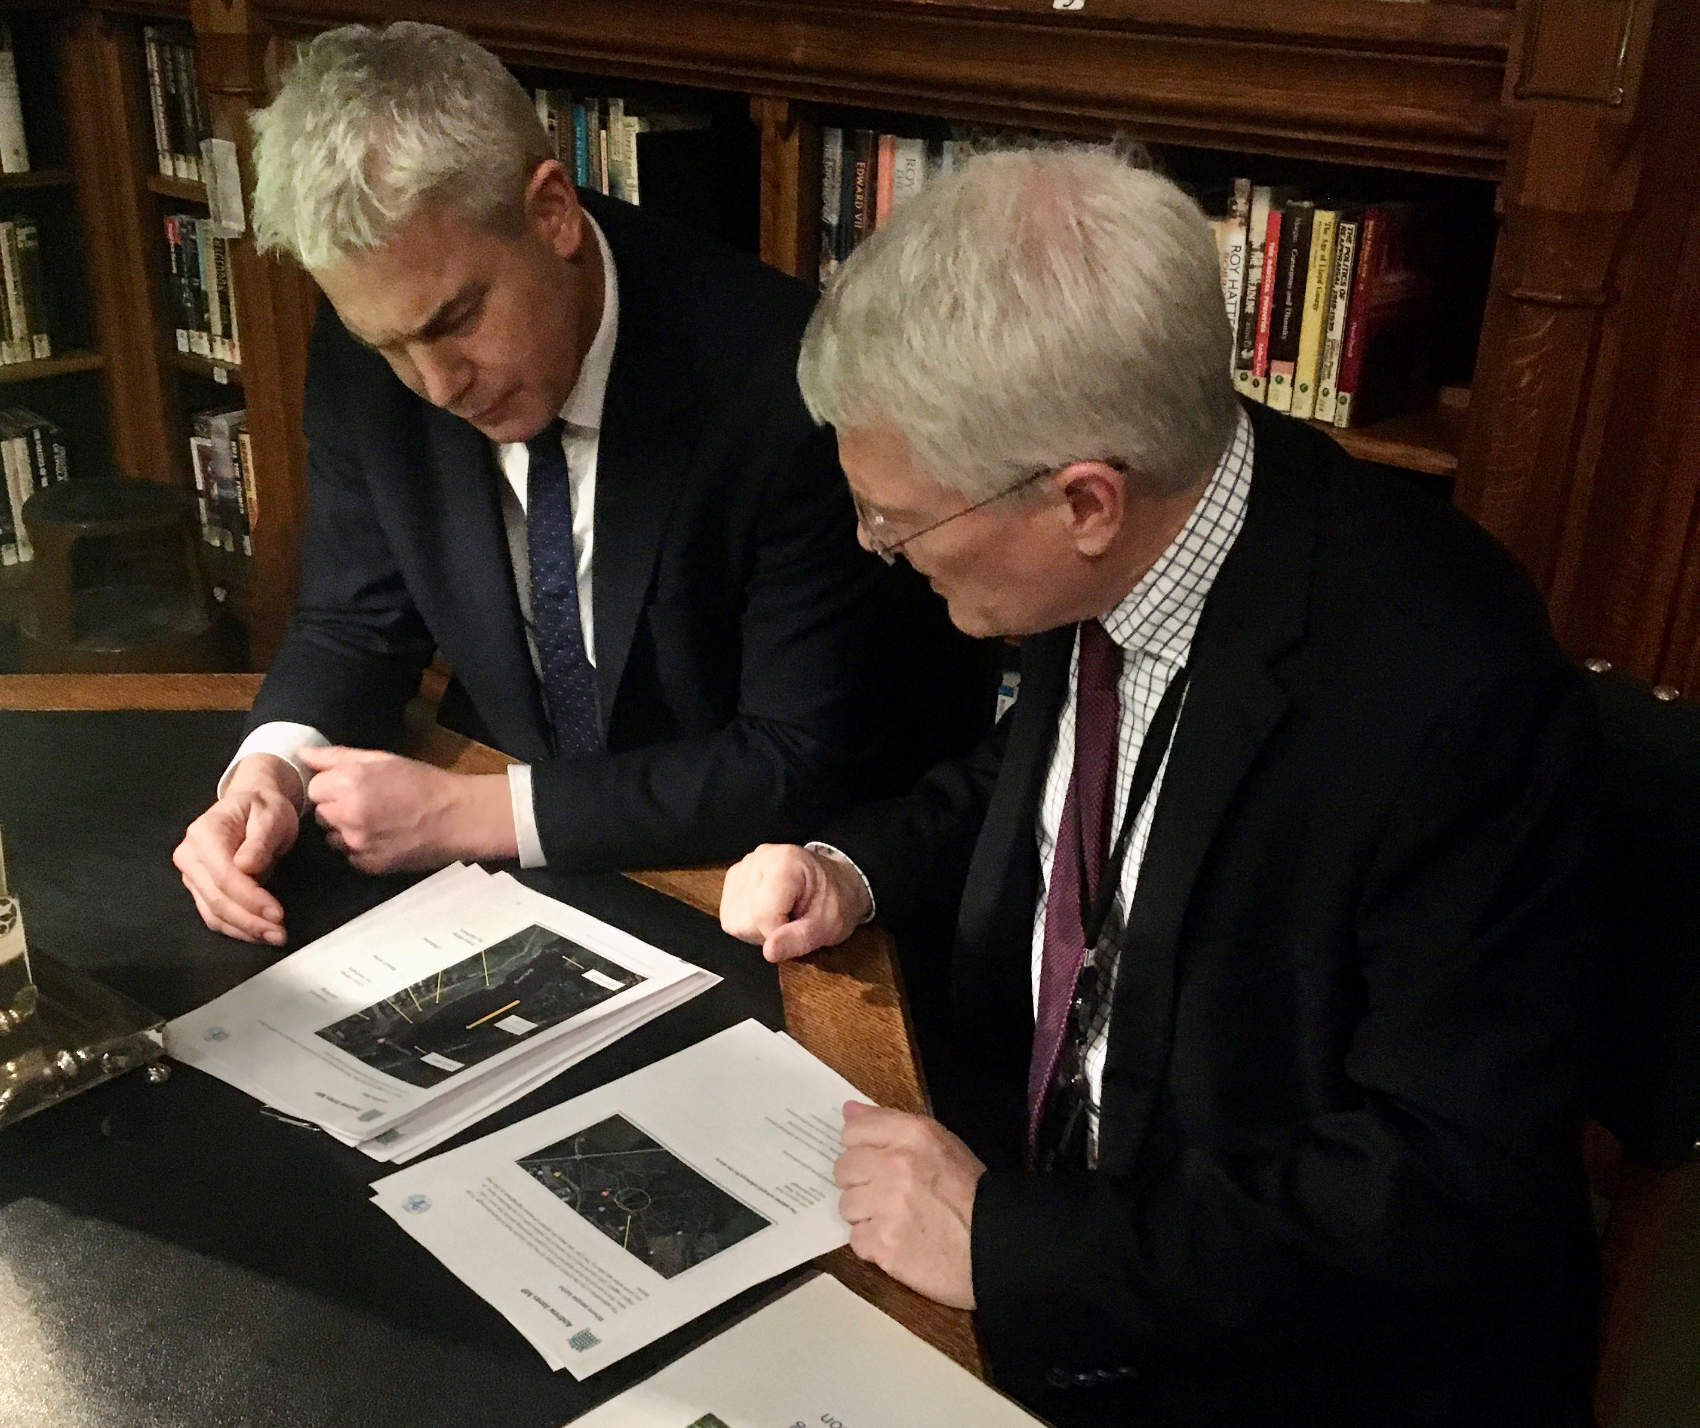 Harrogate and Knaresborough MP, Andrew Jones, has briefed the new Secretary of State for the Environment, Rt Hon Steve Barclay MP